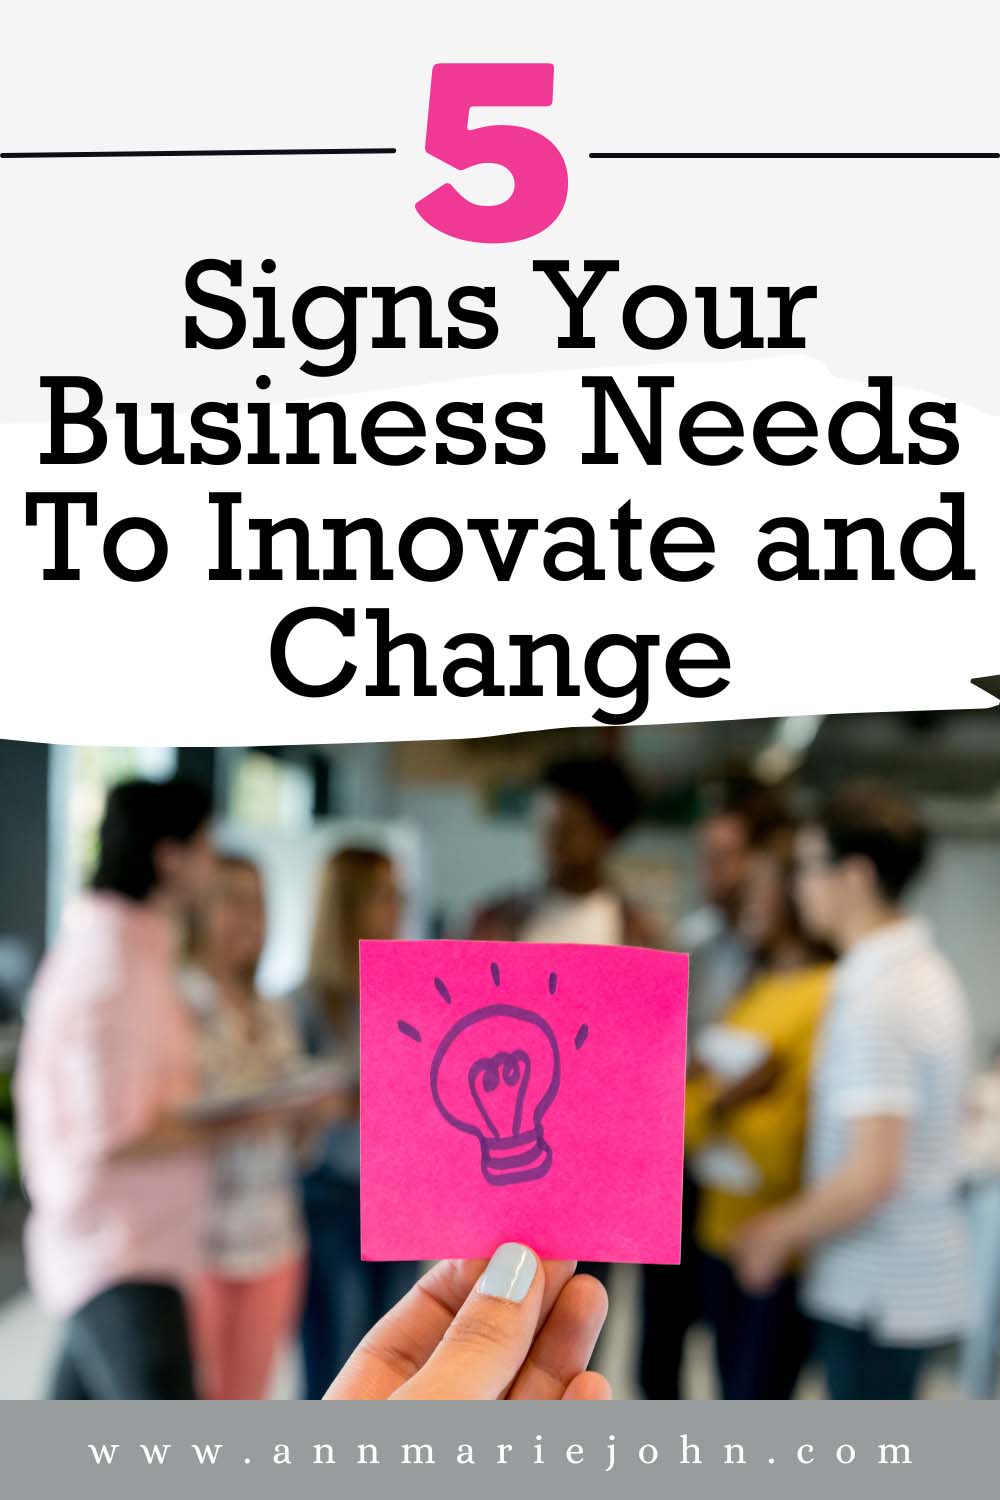 Signs Your Business Needs To Innovate and Change